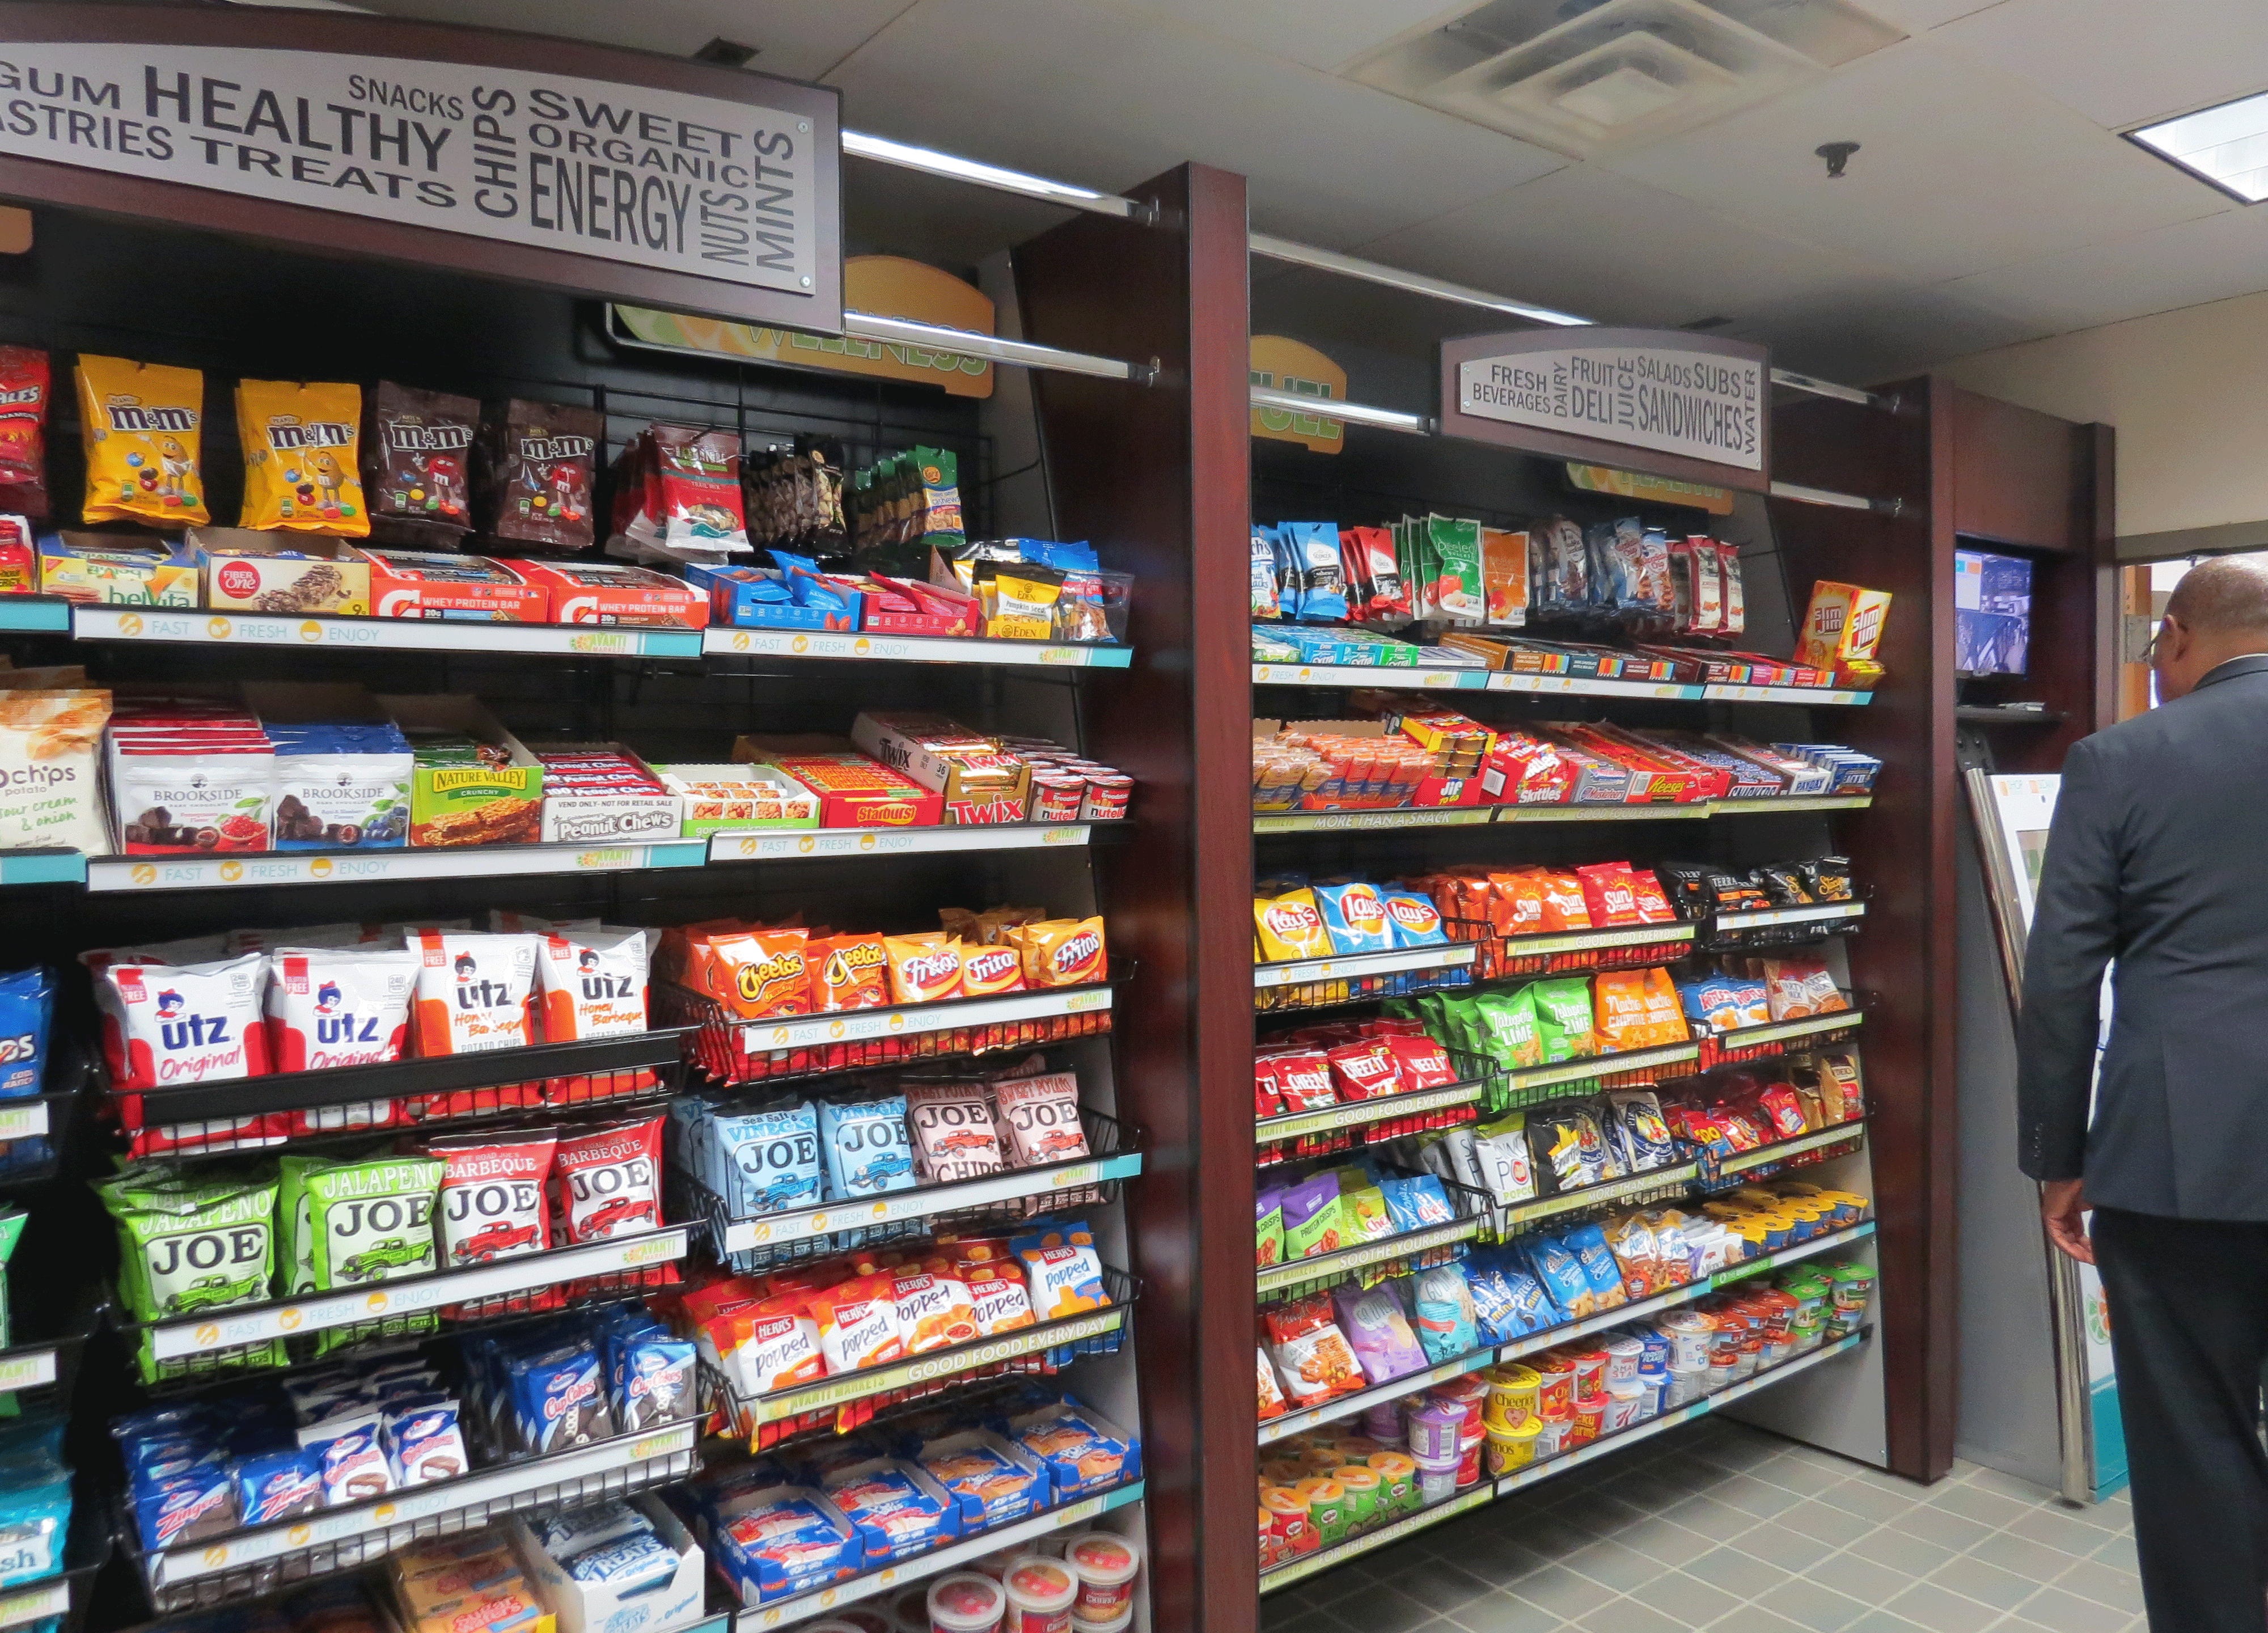 A BEP micormarket's shelves, stocked with snack foods.